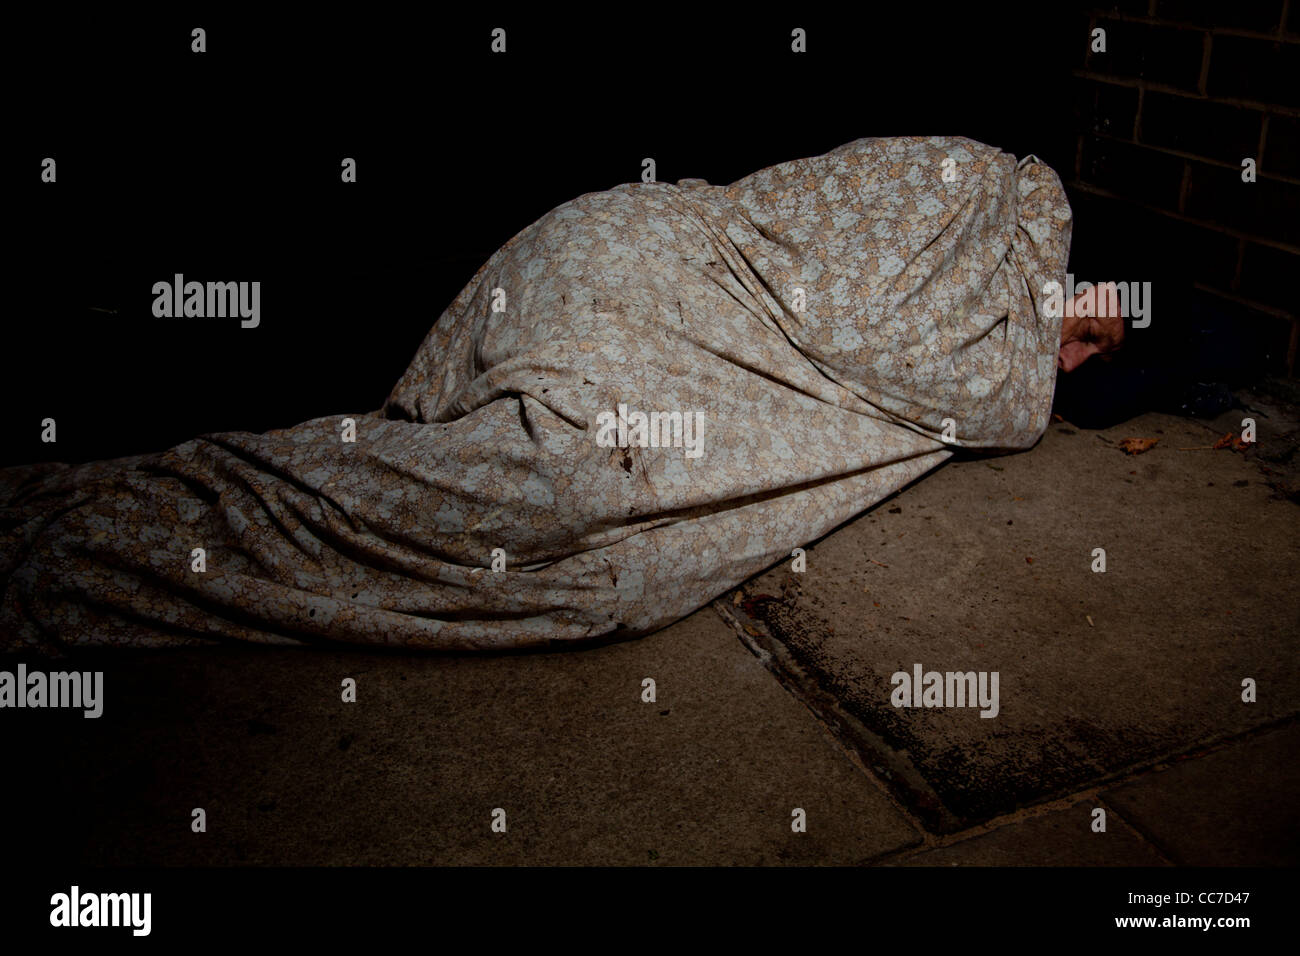 Image depicting a homeless man sleeping covered in a blanket on the cold stone pavement. Stock Photo